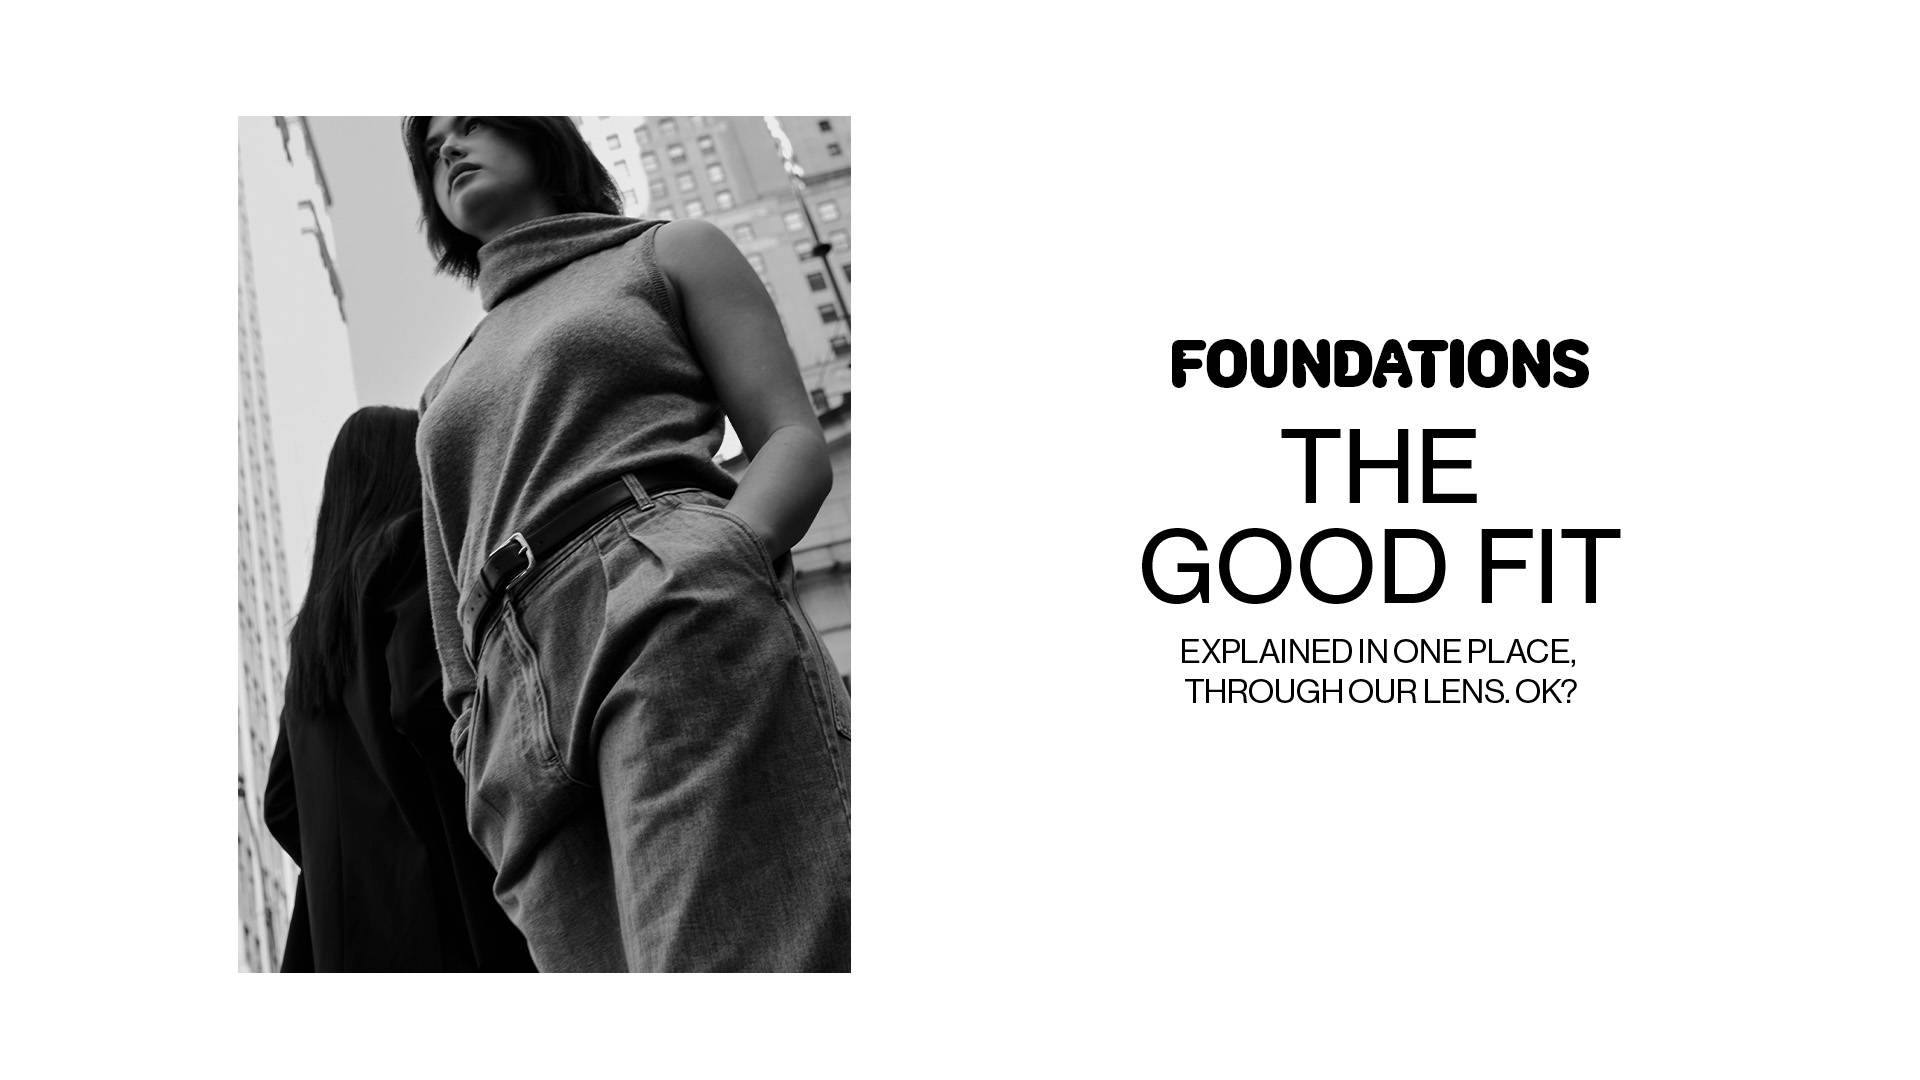 The Good Ick Foundations: The Good Fit